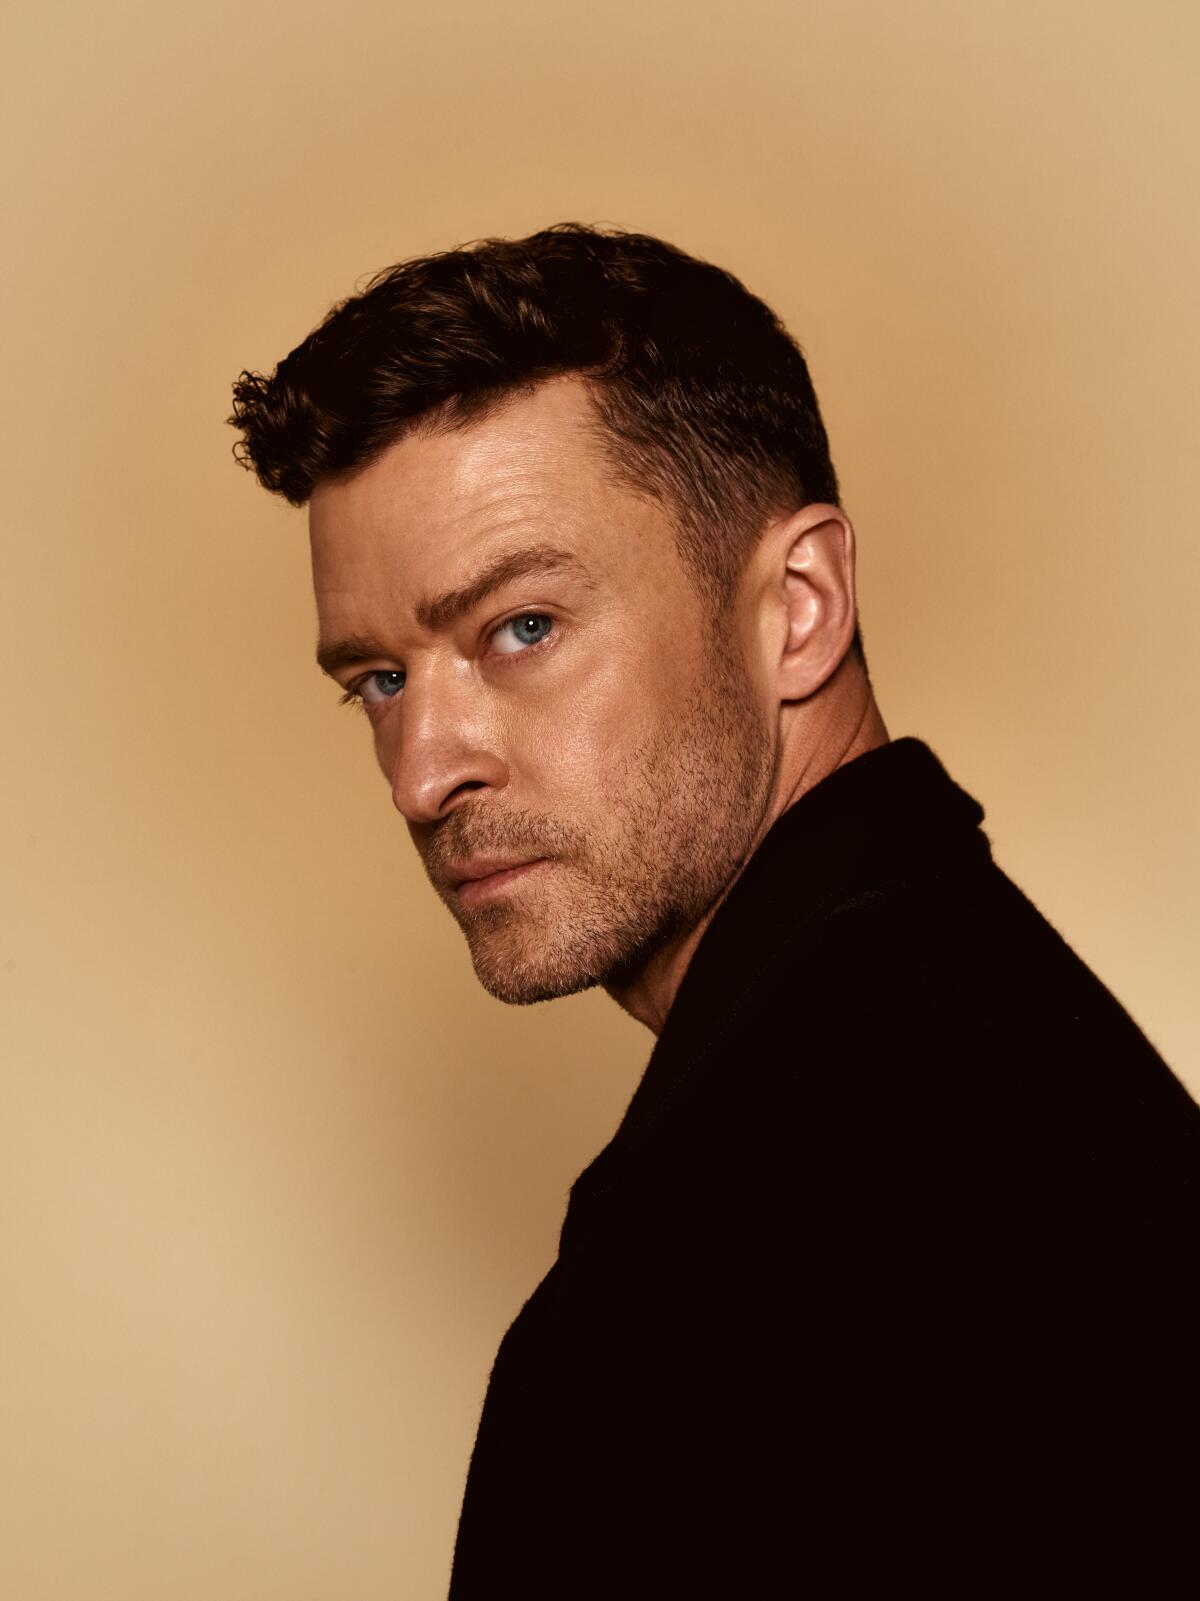 Justin Timberlake in black looks over his left shoulder as he poses against a solid light yellow backdrop